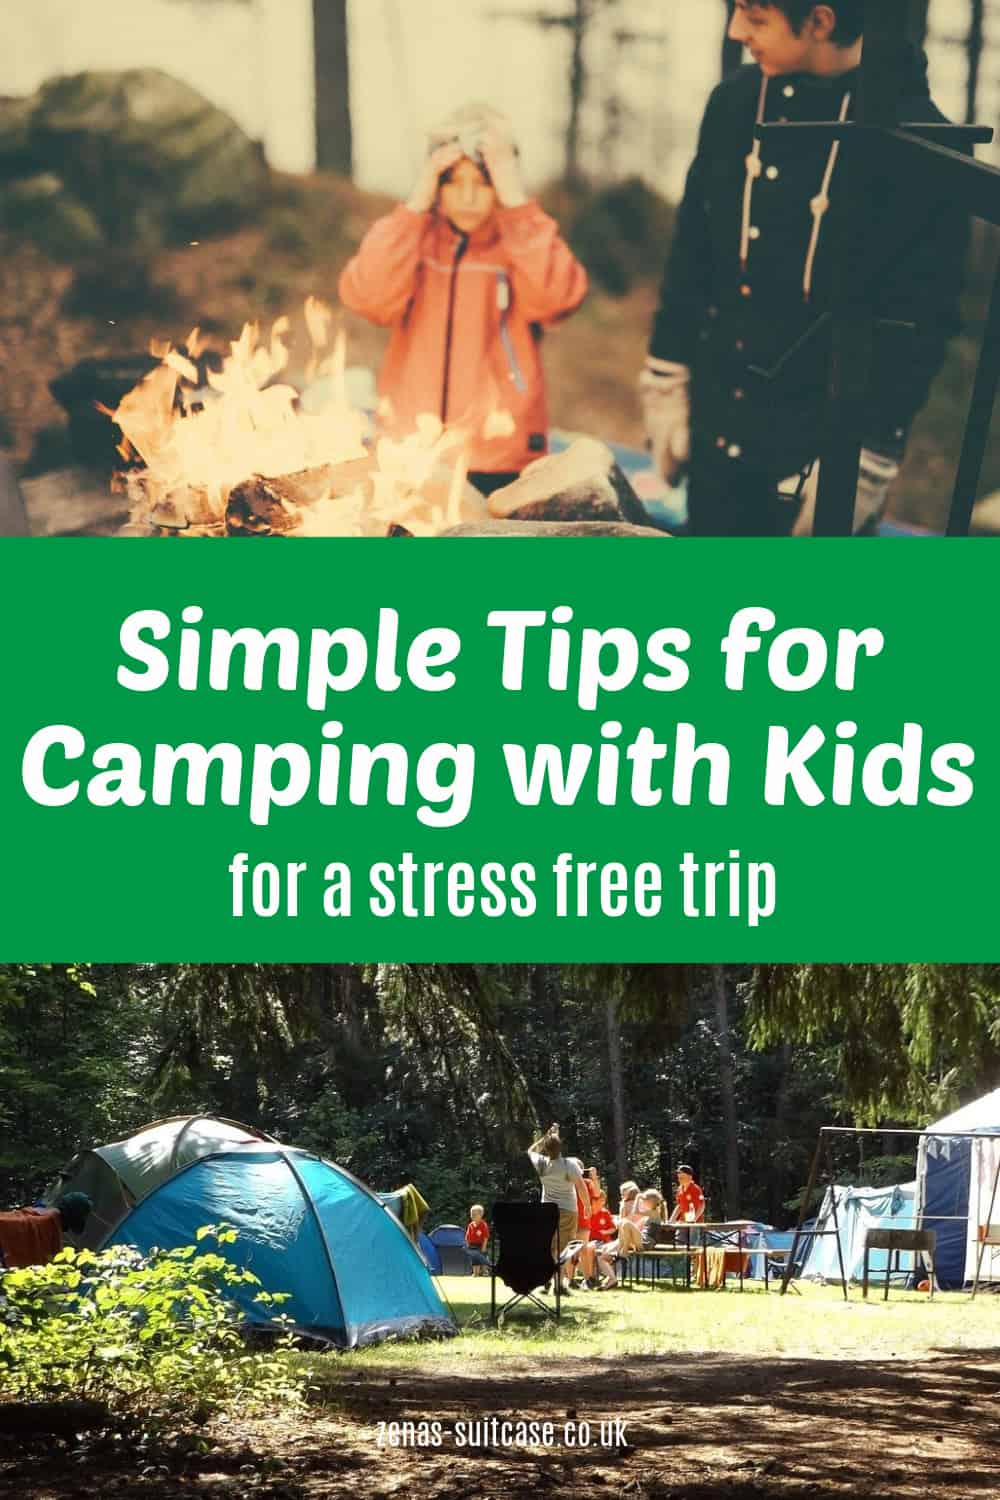 Simple tips for camping with kids for a stress free trip 